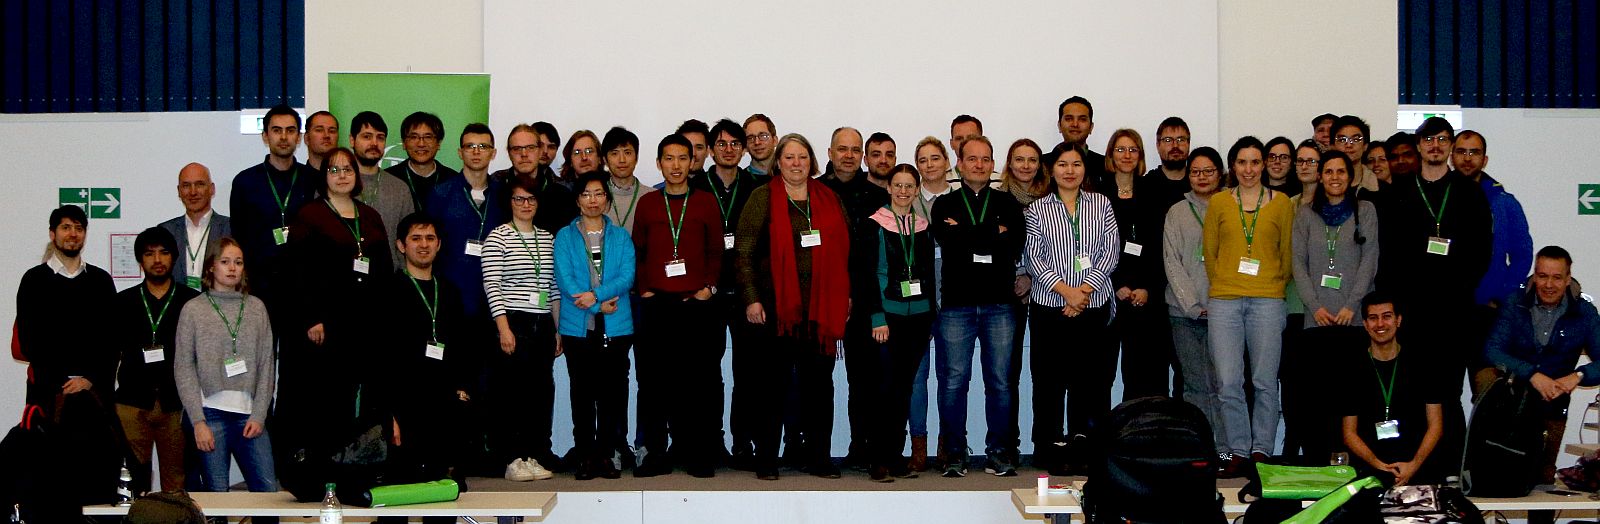 Group Picture - Time-resolved Microscopy Coourse 2020